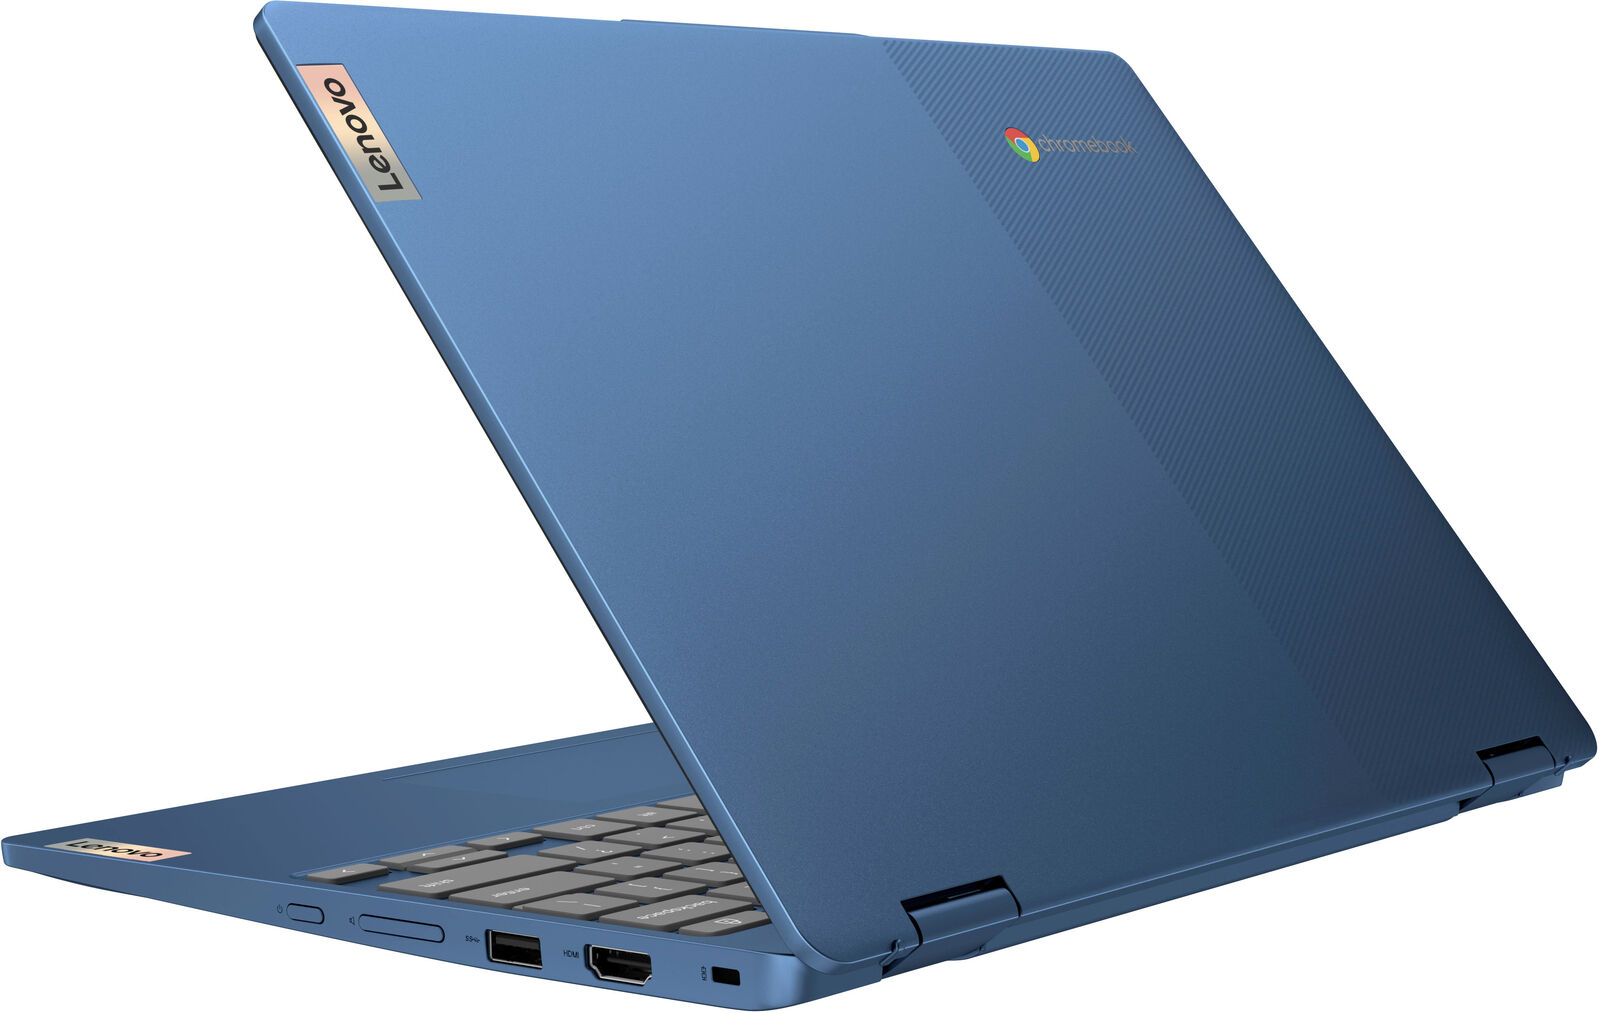 Lenovo - Flex 3i 12.2" WUXGA Touch-Screen Chromebook Laptop - Intel N100 with 4GB Memory - 64GB eMMC - Abyss Blue Notebook PC - image 2 of 3